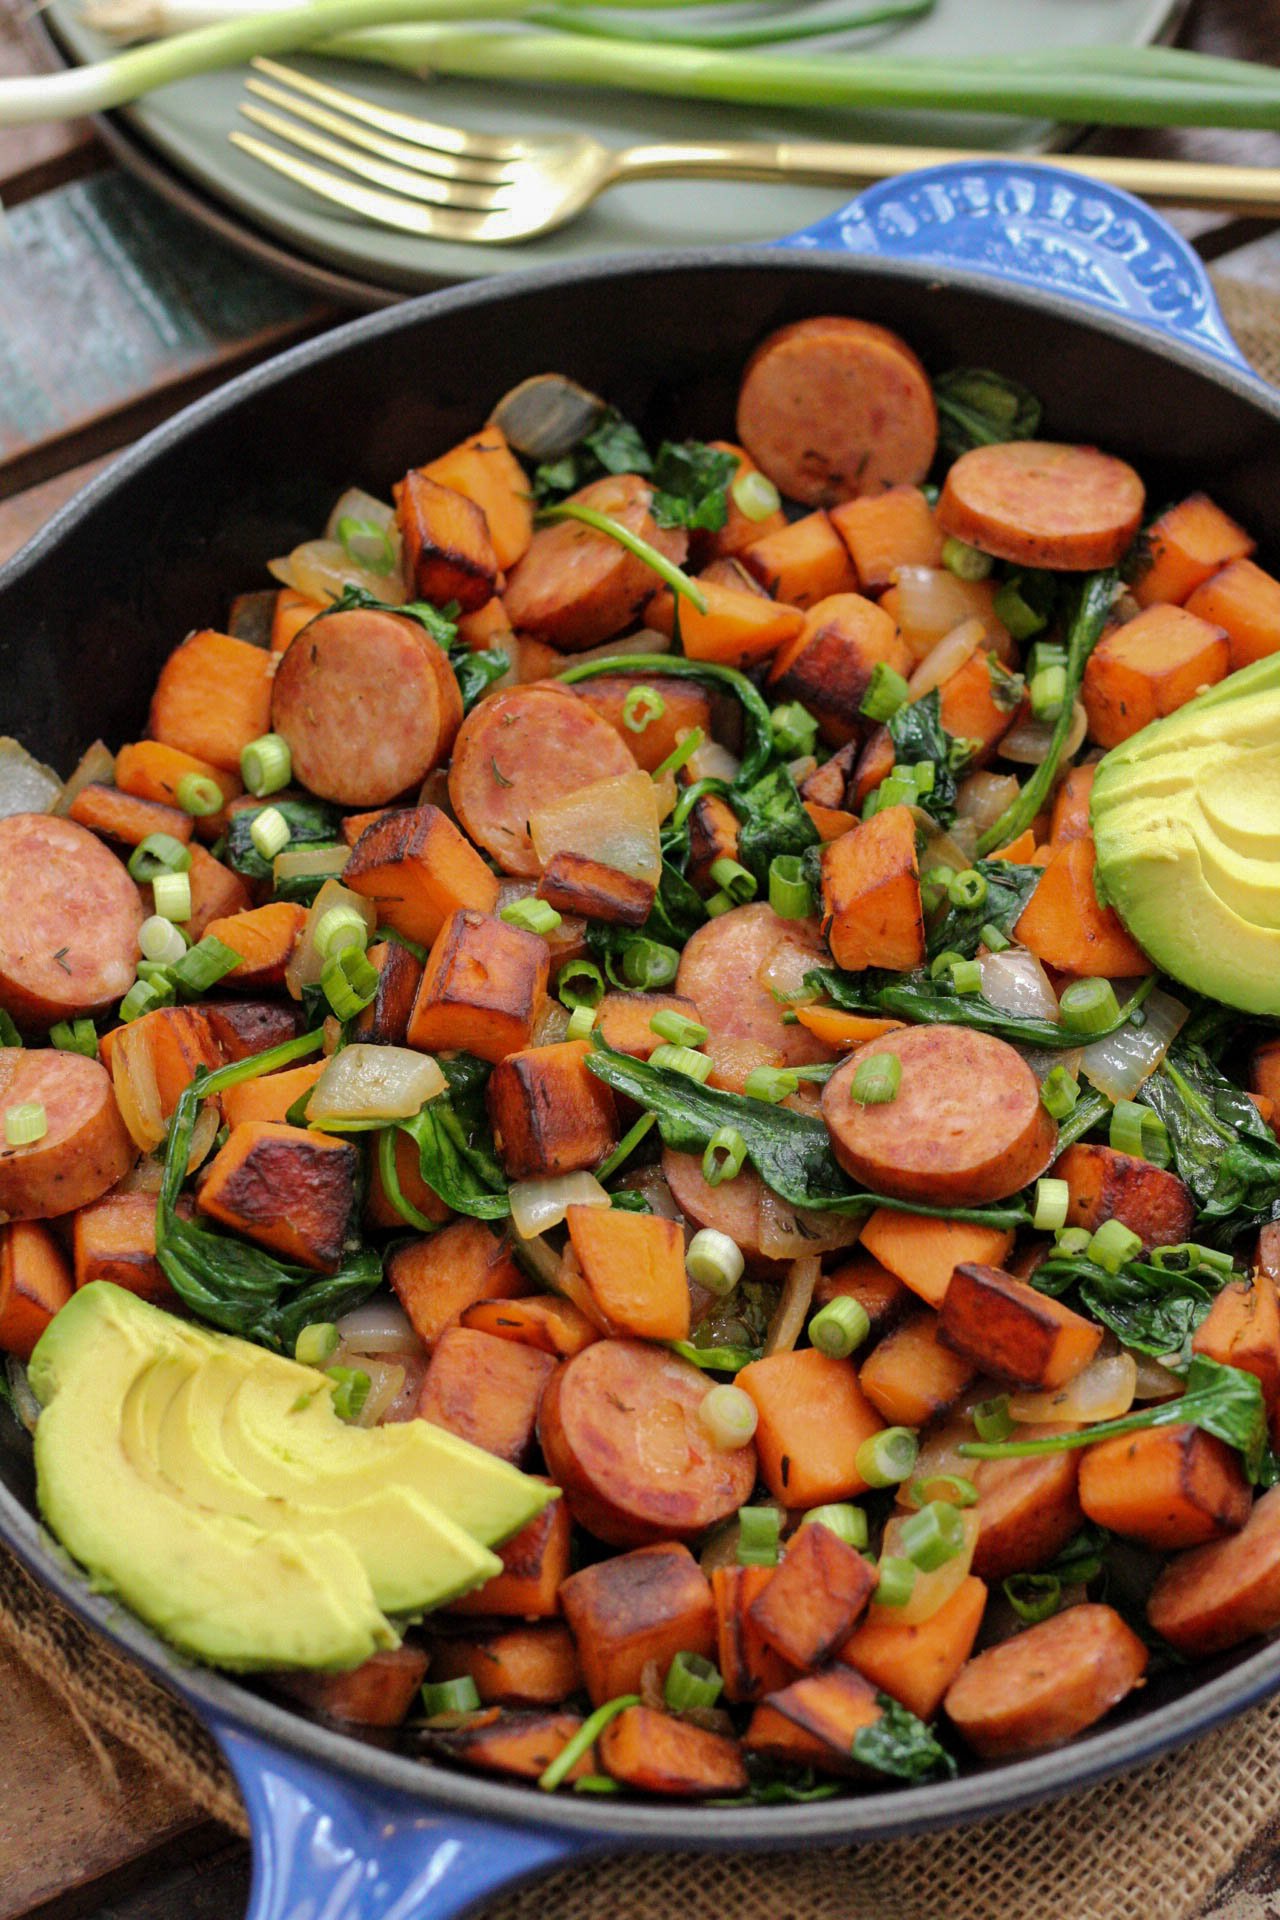 An easy Paleo egg-free breakfast recipe is always a simple go to meal. This skillet is full of healthy vegetables, flavorful spices and sausage! This egg-free breakfast is also Whole30 for when you're sick of eggs or want to meal prep breakfast! #eggfreebreakfast #paleobreakfast #whole30breakfast #breakfastskillet #breakfasthash